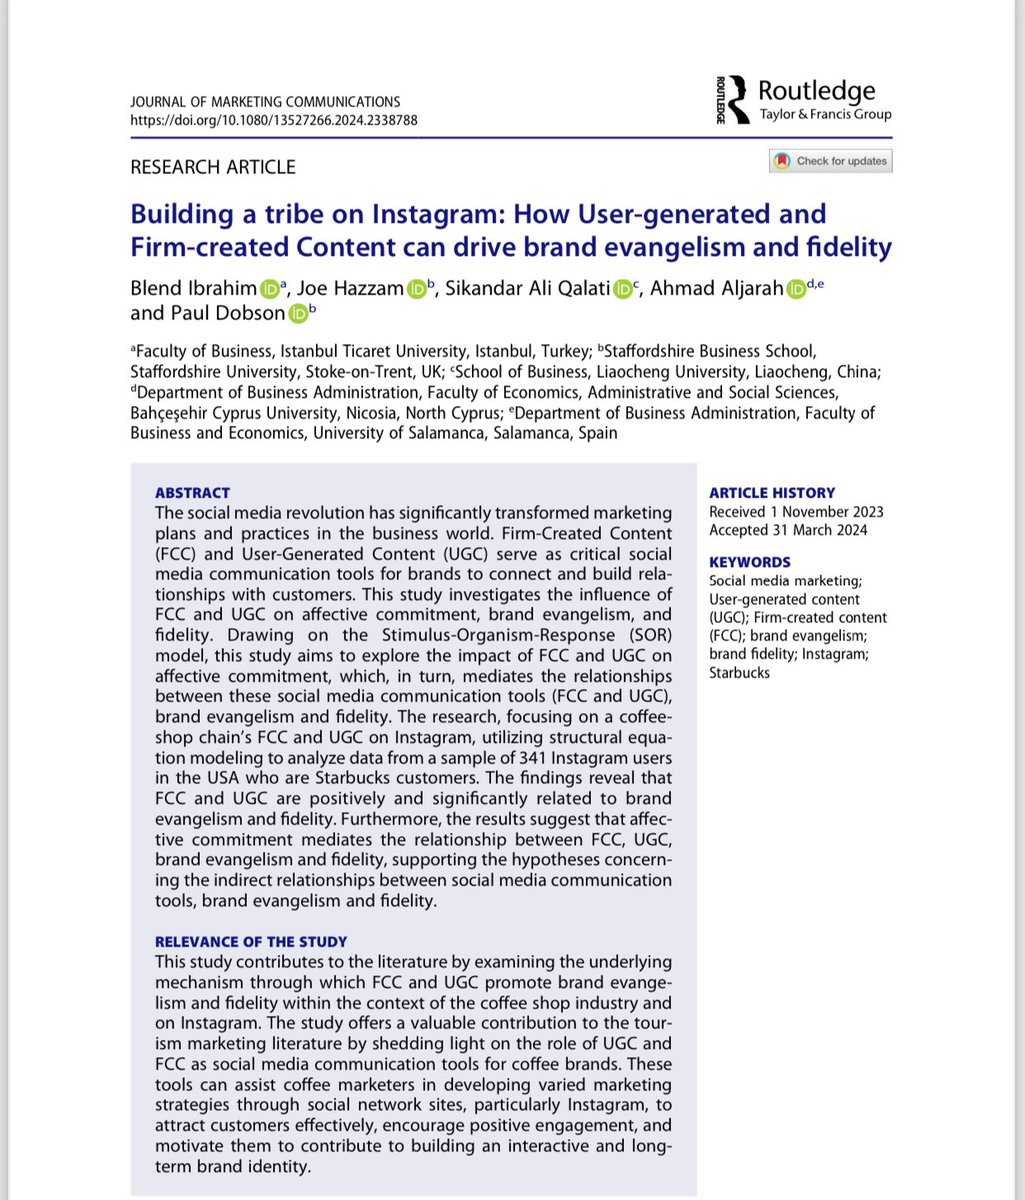 New research publications 👌 We have examined the underlying mechanism through which firm created content #FCC and user generated #UGC content promote #brand evangelism and fidelity on #Instagram within the context of the coffee shop industry. tandfonline.com/eprint/M6HJEJ5…